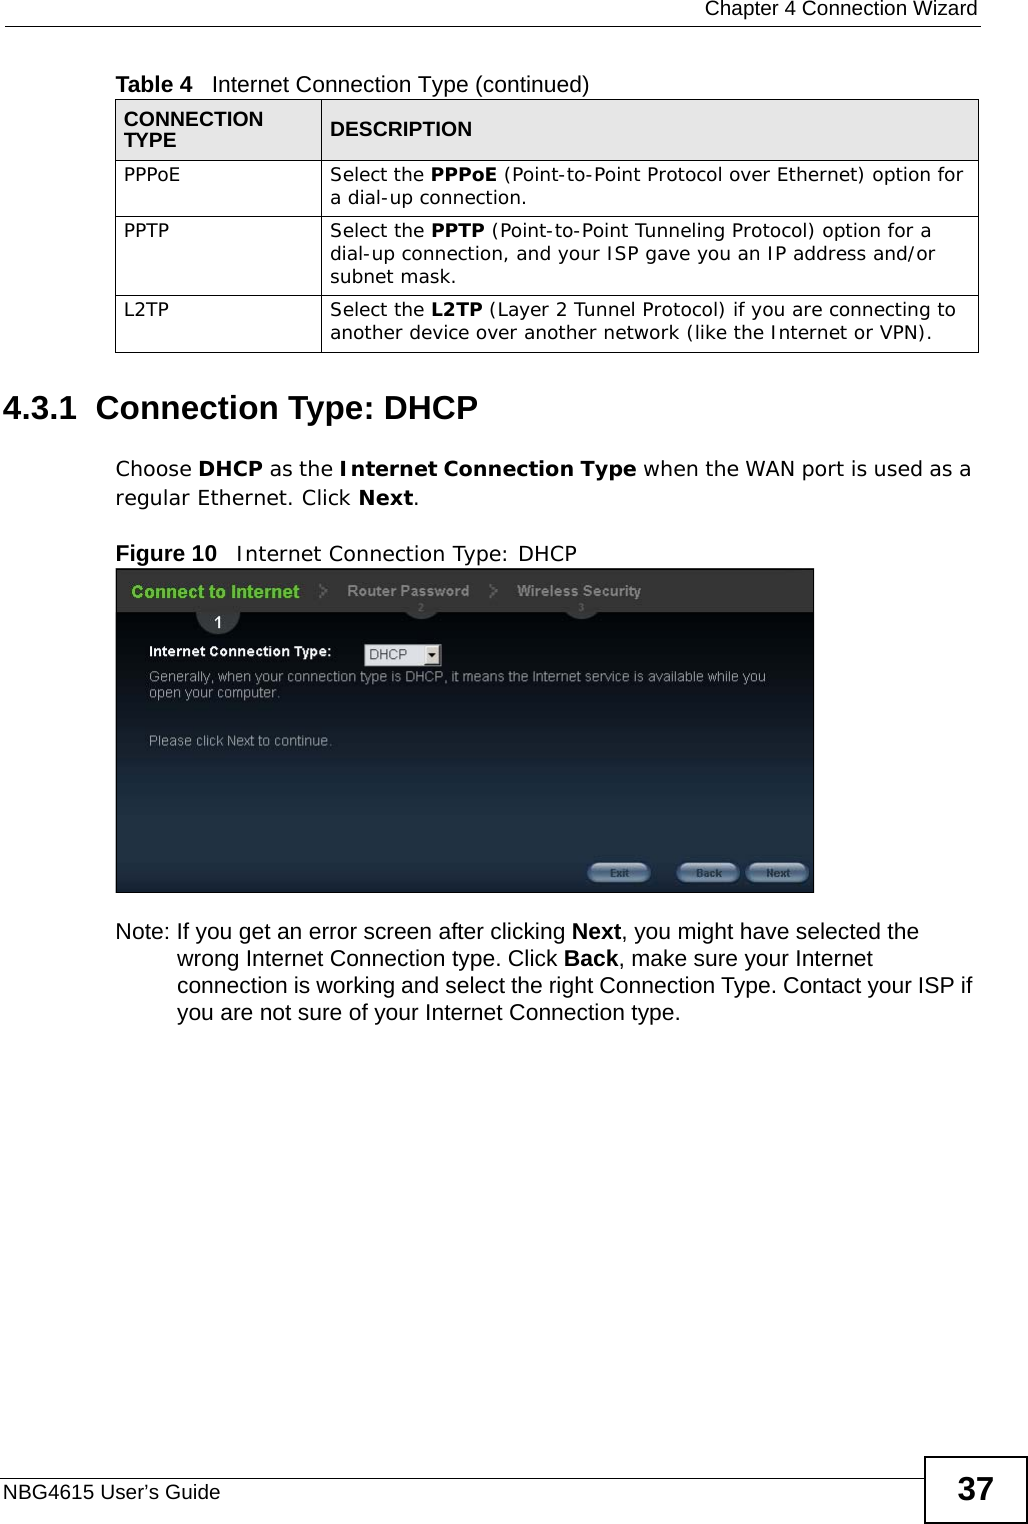  Chapter 4 Connection WizardNBG4615 User’s Guide 374.3.1  Connection Type: DHCP Choose DHCP as the Internet Connection Type when the WAN port is used as a regular Ethernet. Click Next.Figure 10   Internet Connection Type: DHCP Note: If you get an error screen after clicking Next, you might have selected the wrong Internet Connection type. Click Back, make sure your Internet connection is working and select the right Connection Type. Contact your ISP if you are not sure of your Internet Connection type.PPPoE Select the PPPoE (Point-to-Point Protocol over Ethernet) option for a dial-up connection.PPTP Select the PPTP (Point-to-Point Tunneling Protocol) option for a dial-up connection, and your ISP gave you an IP address and/or subnet mask.L2TP Select the L2TP (Layer 2 Tunnel Protocol) if you are connecting to another device over another network (like the Internet or VPN).Table 4   Internet Connection Type (continued)CONNECTION TYPE DESCRIPTION